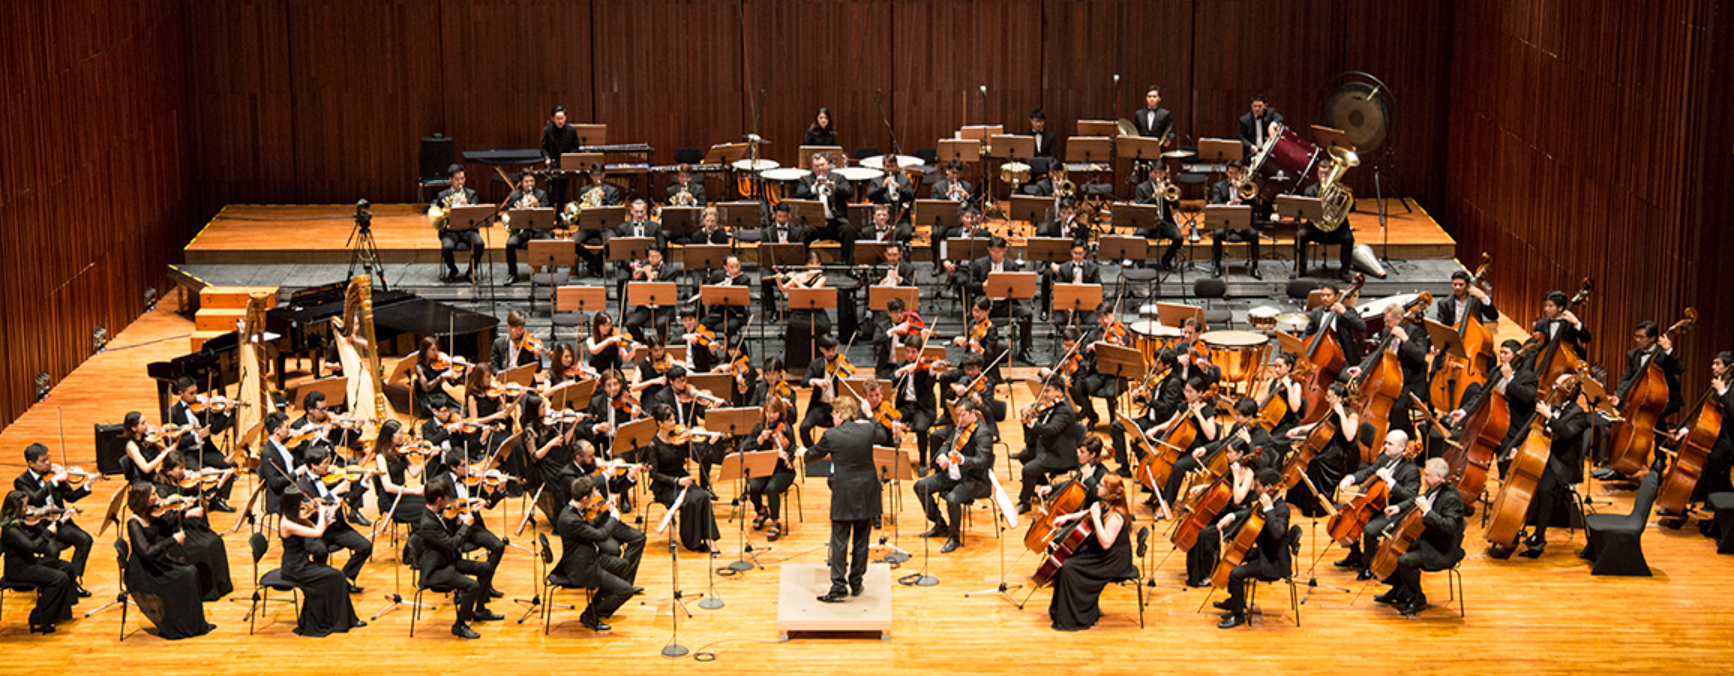 For a cool thing to do in Thailand, attend a performance by the world-renowned Thailand Philharmonic Orchestra at Prince Mahidol Hall.